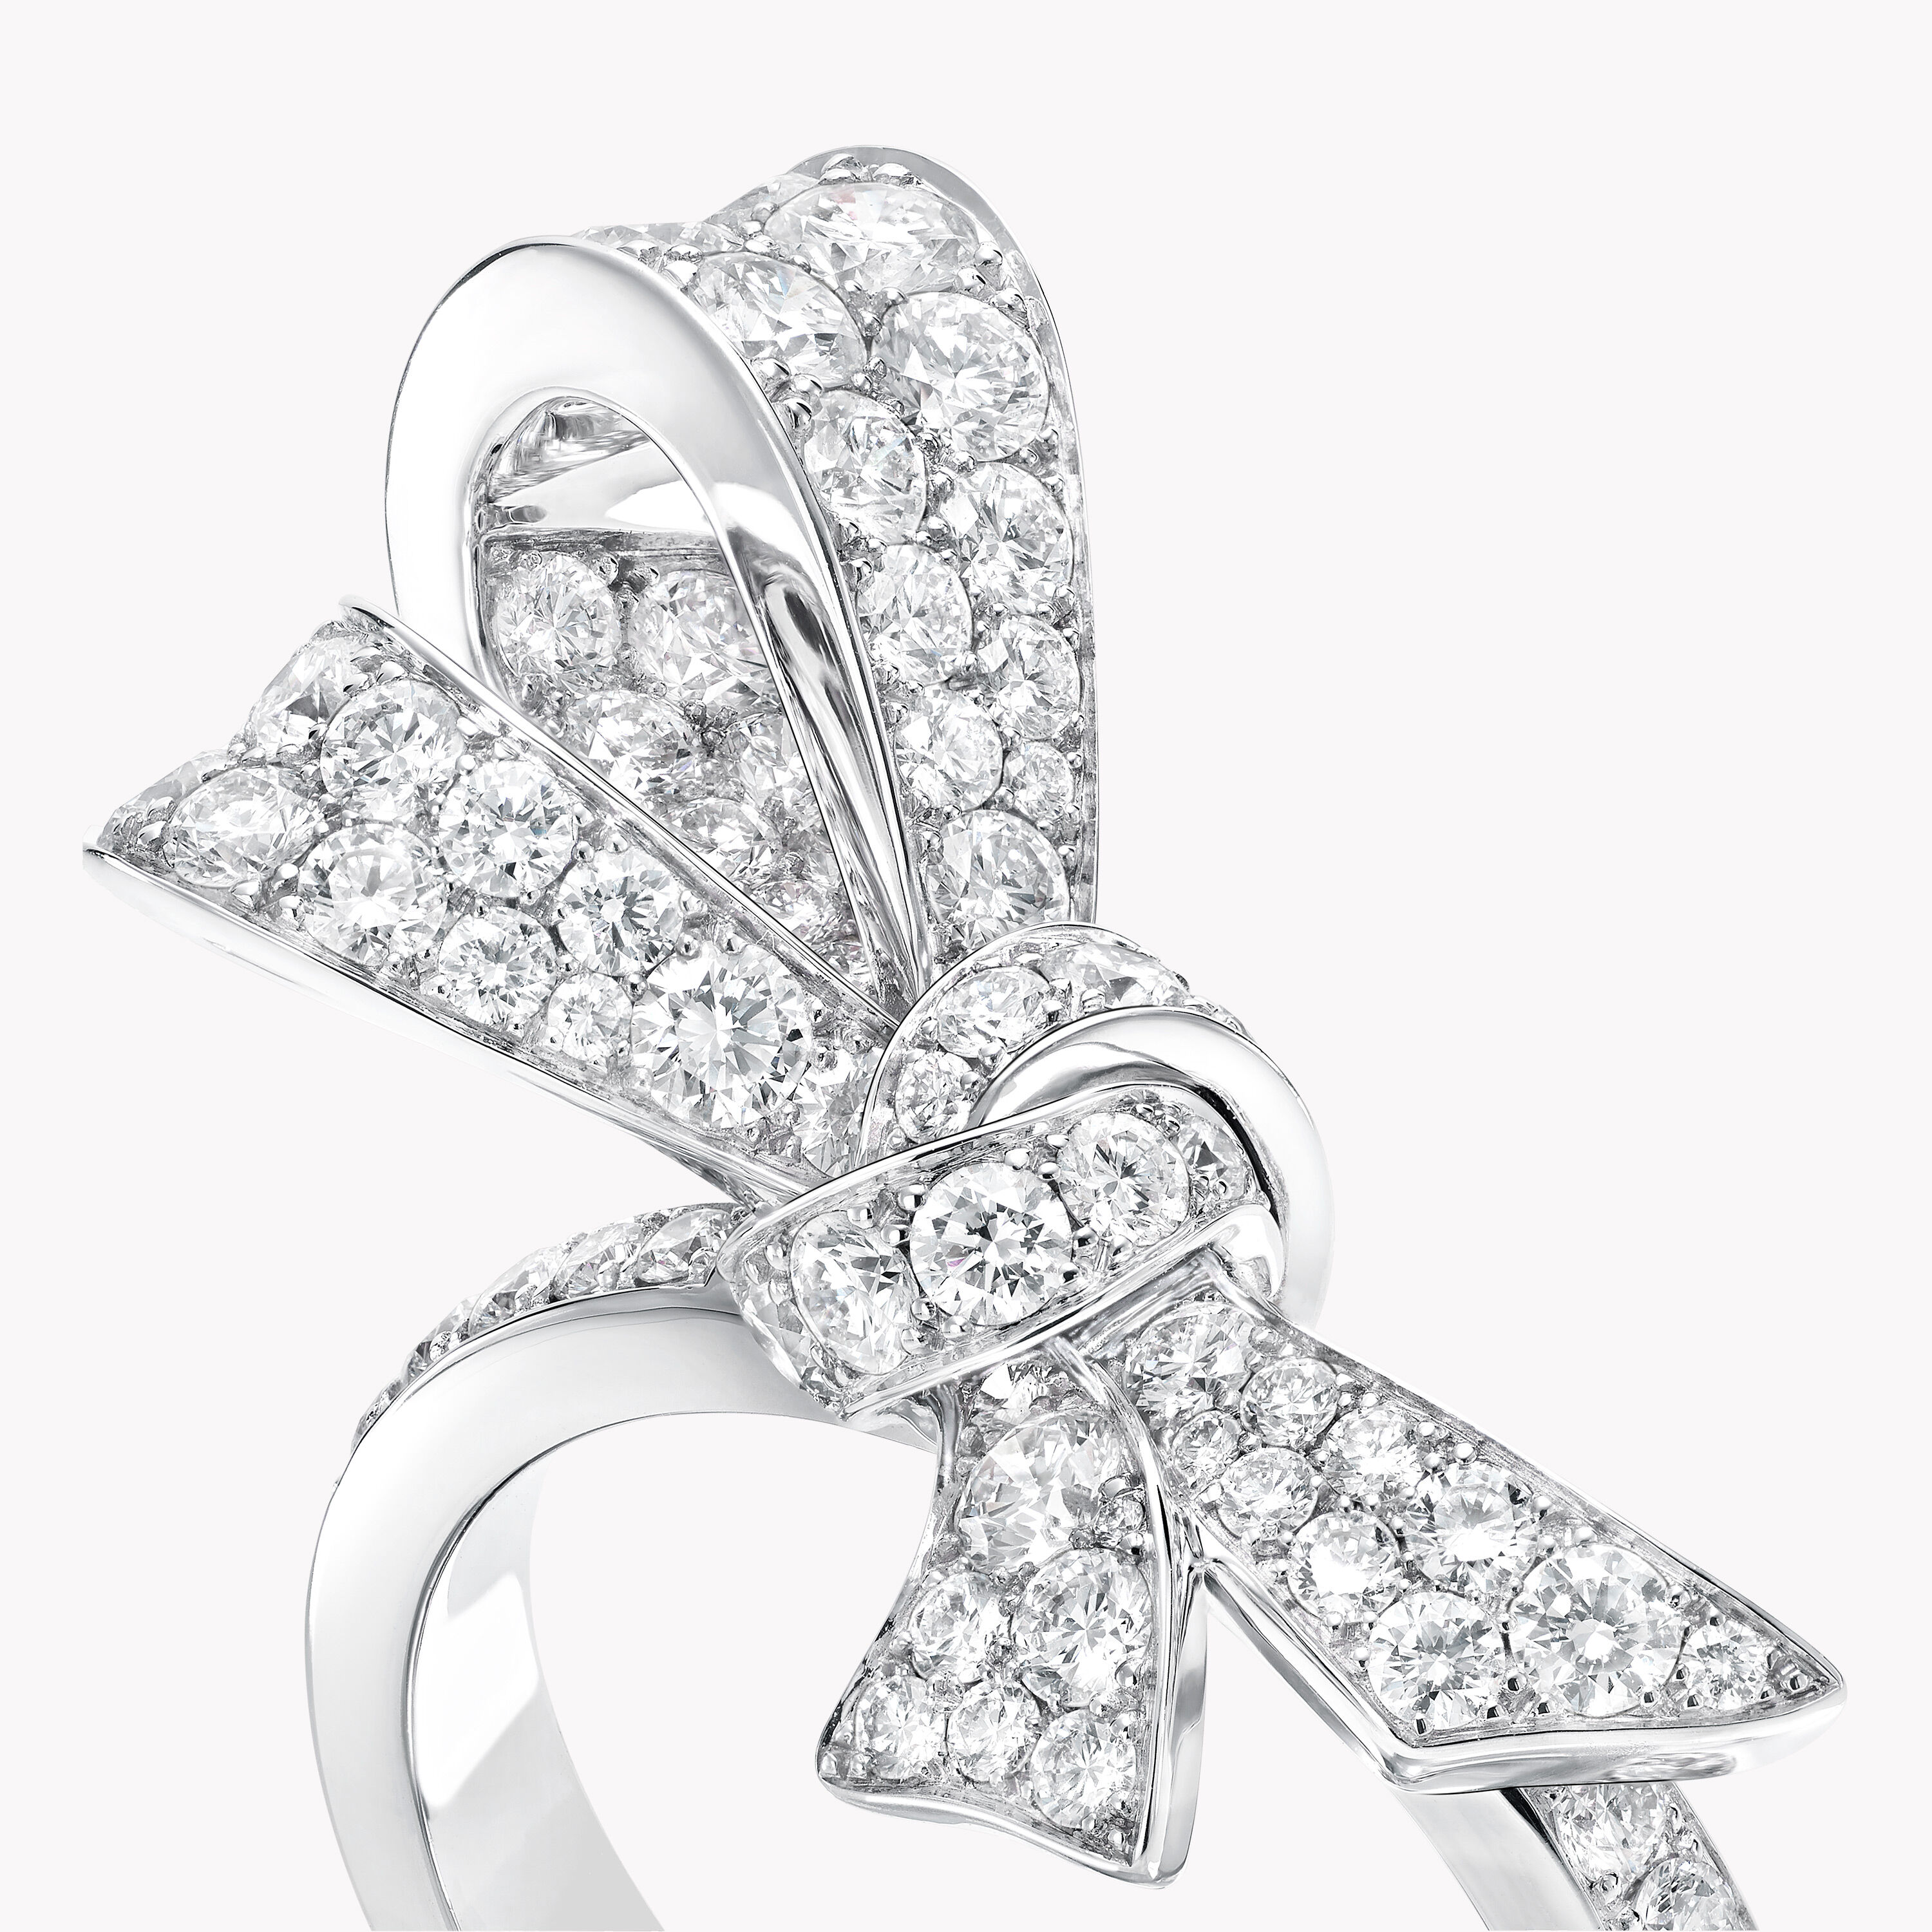 Daydream' Bow Ring - 'Two Worlds' Alice in Wonderland Collection